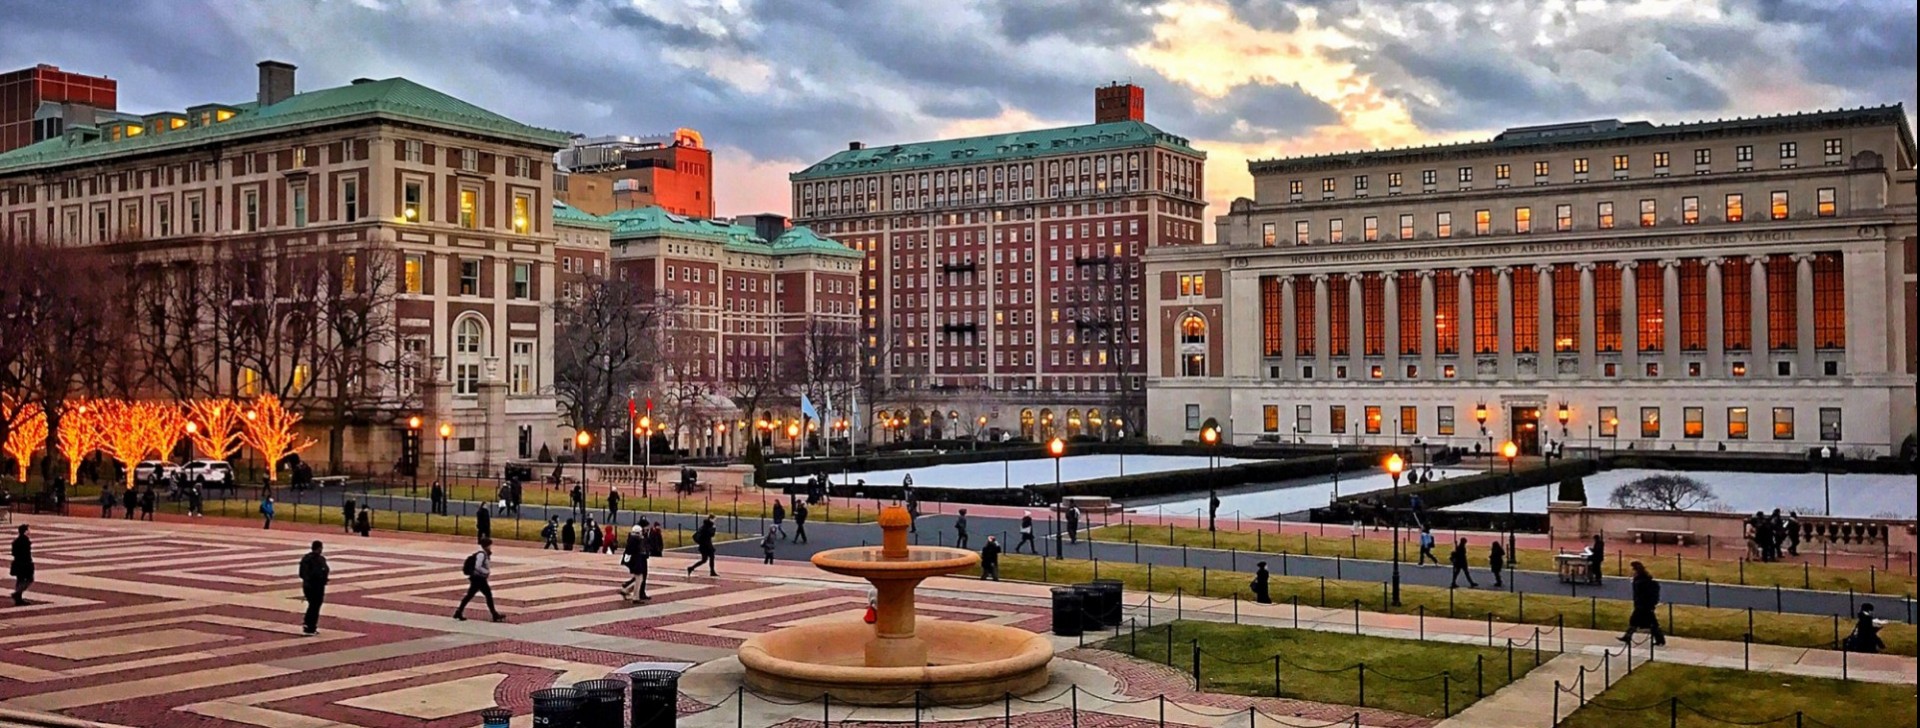 Columbia's Morningside campus at dusk